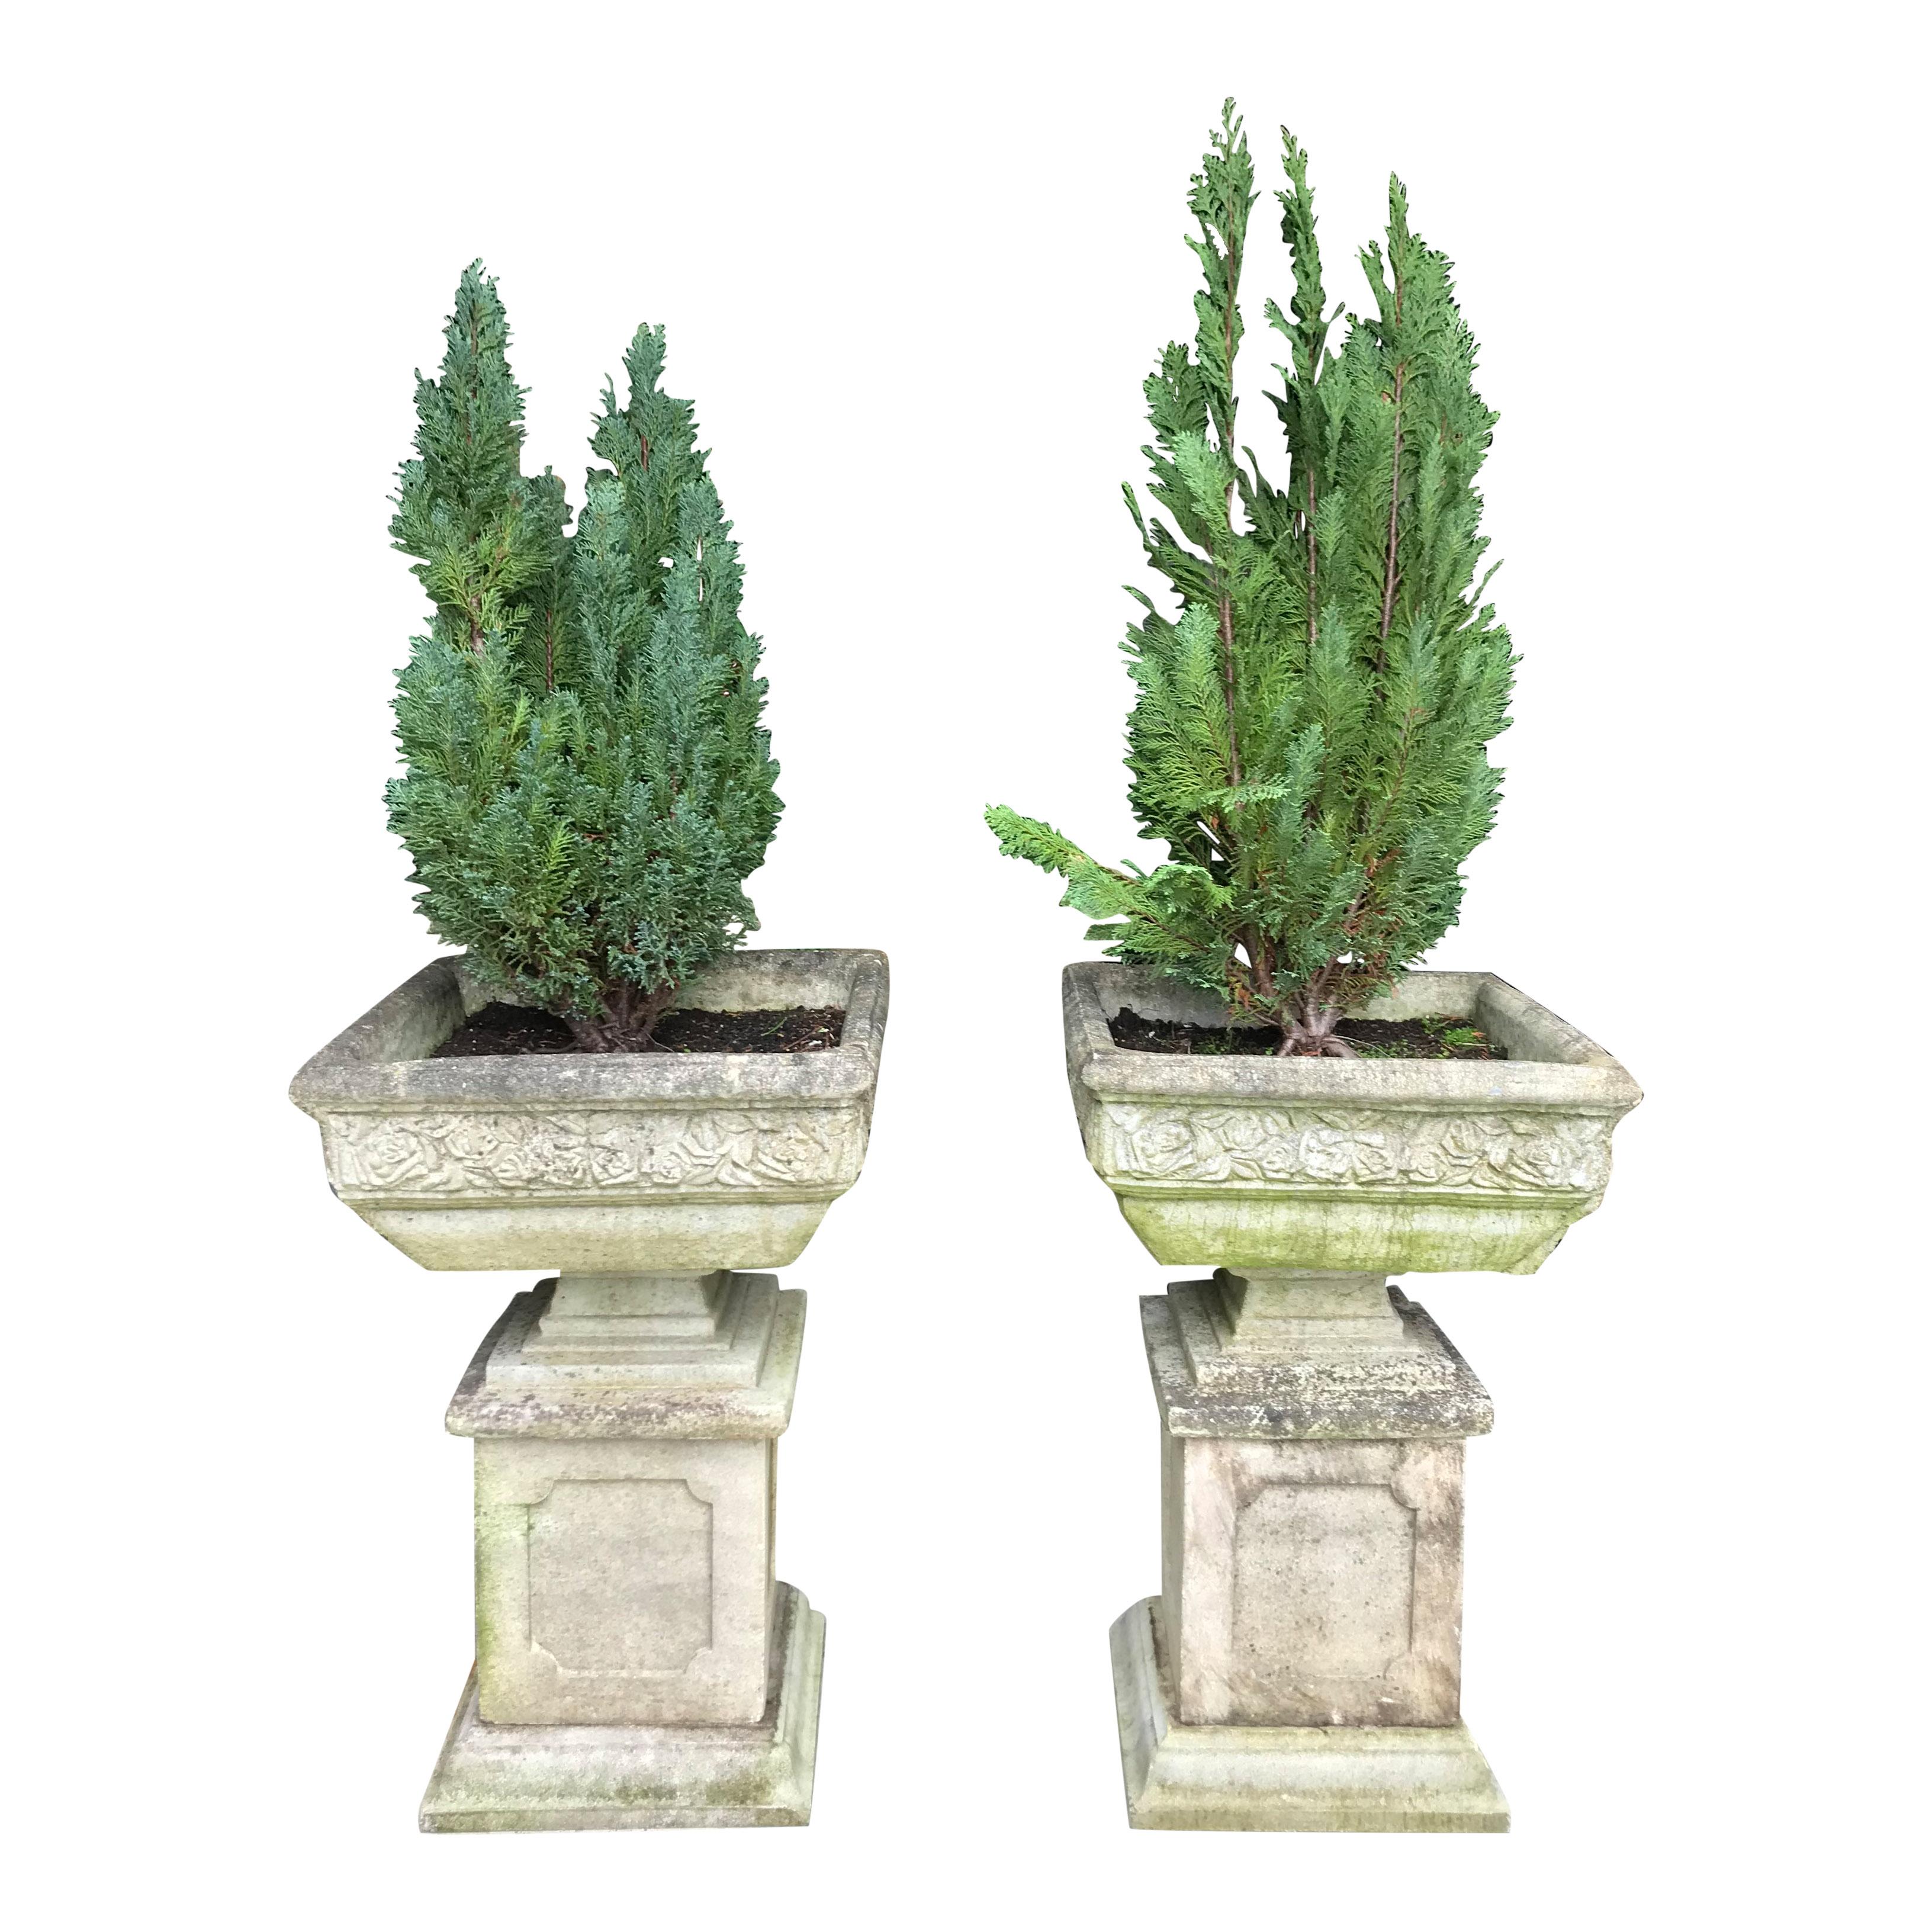 A pair of good size 20th century Garden recon stone planters on plinths. The planters have nicely weathered with age. Will make a nice addition to a garden or front of the home.